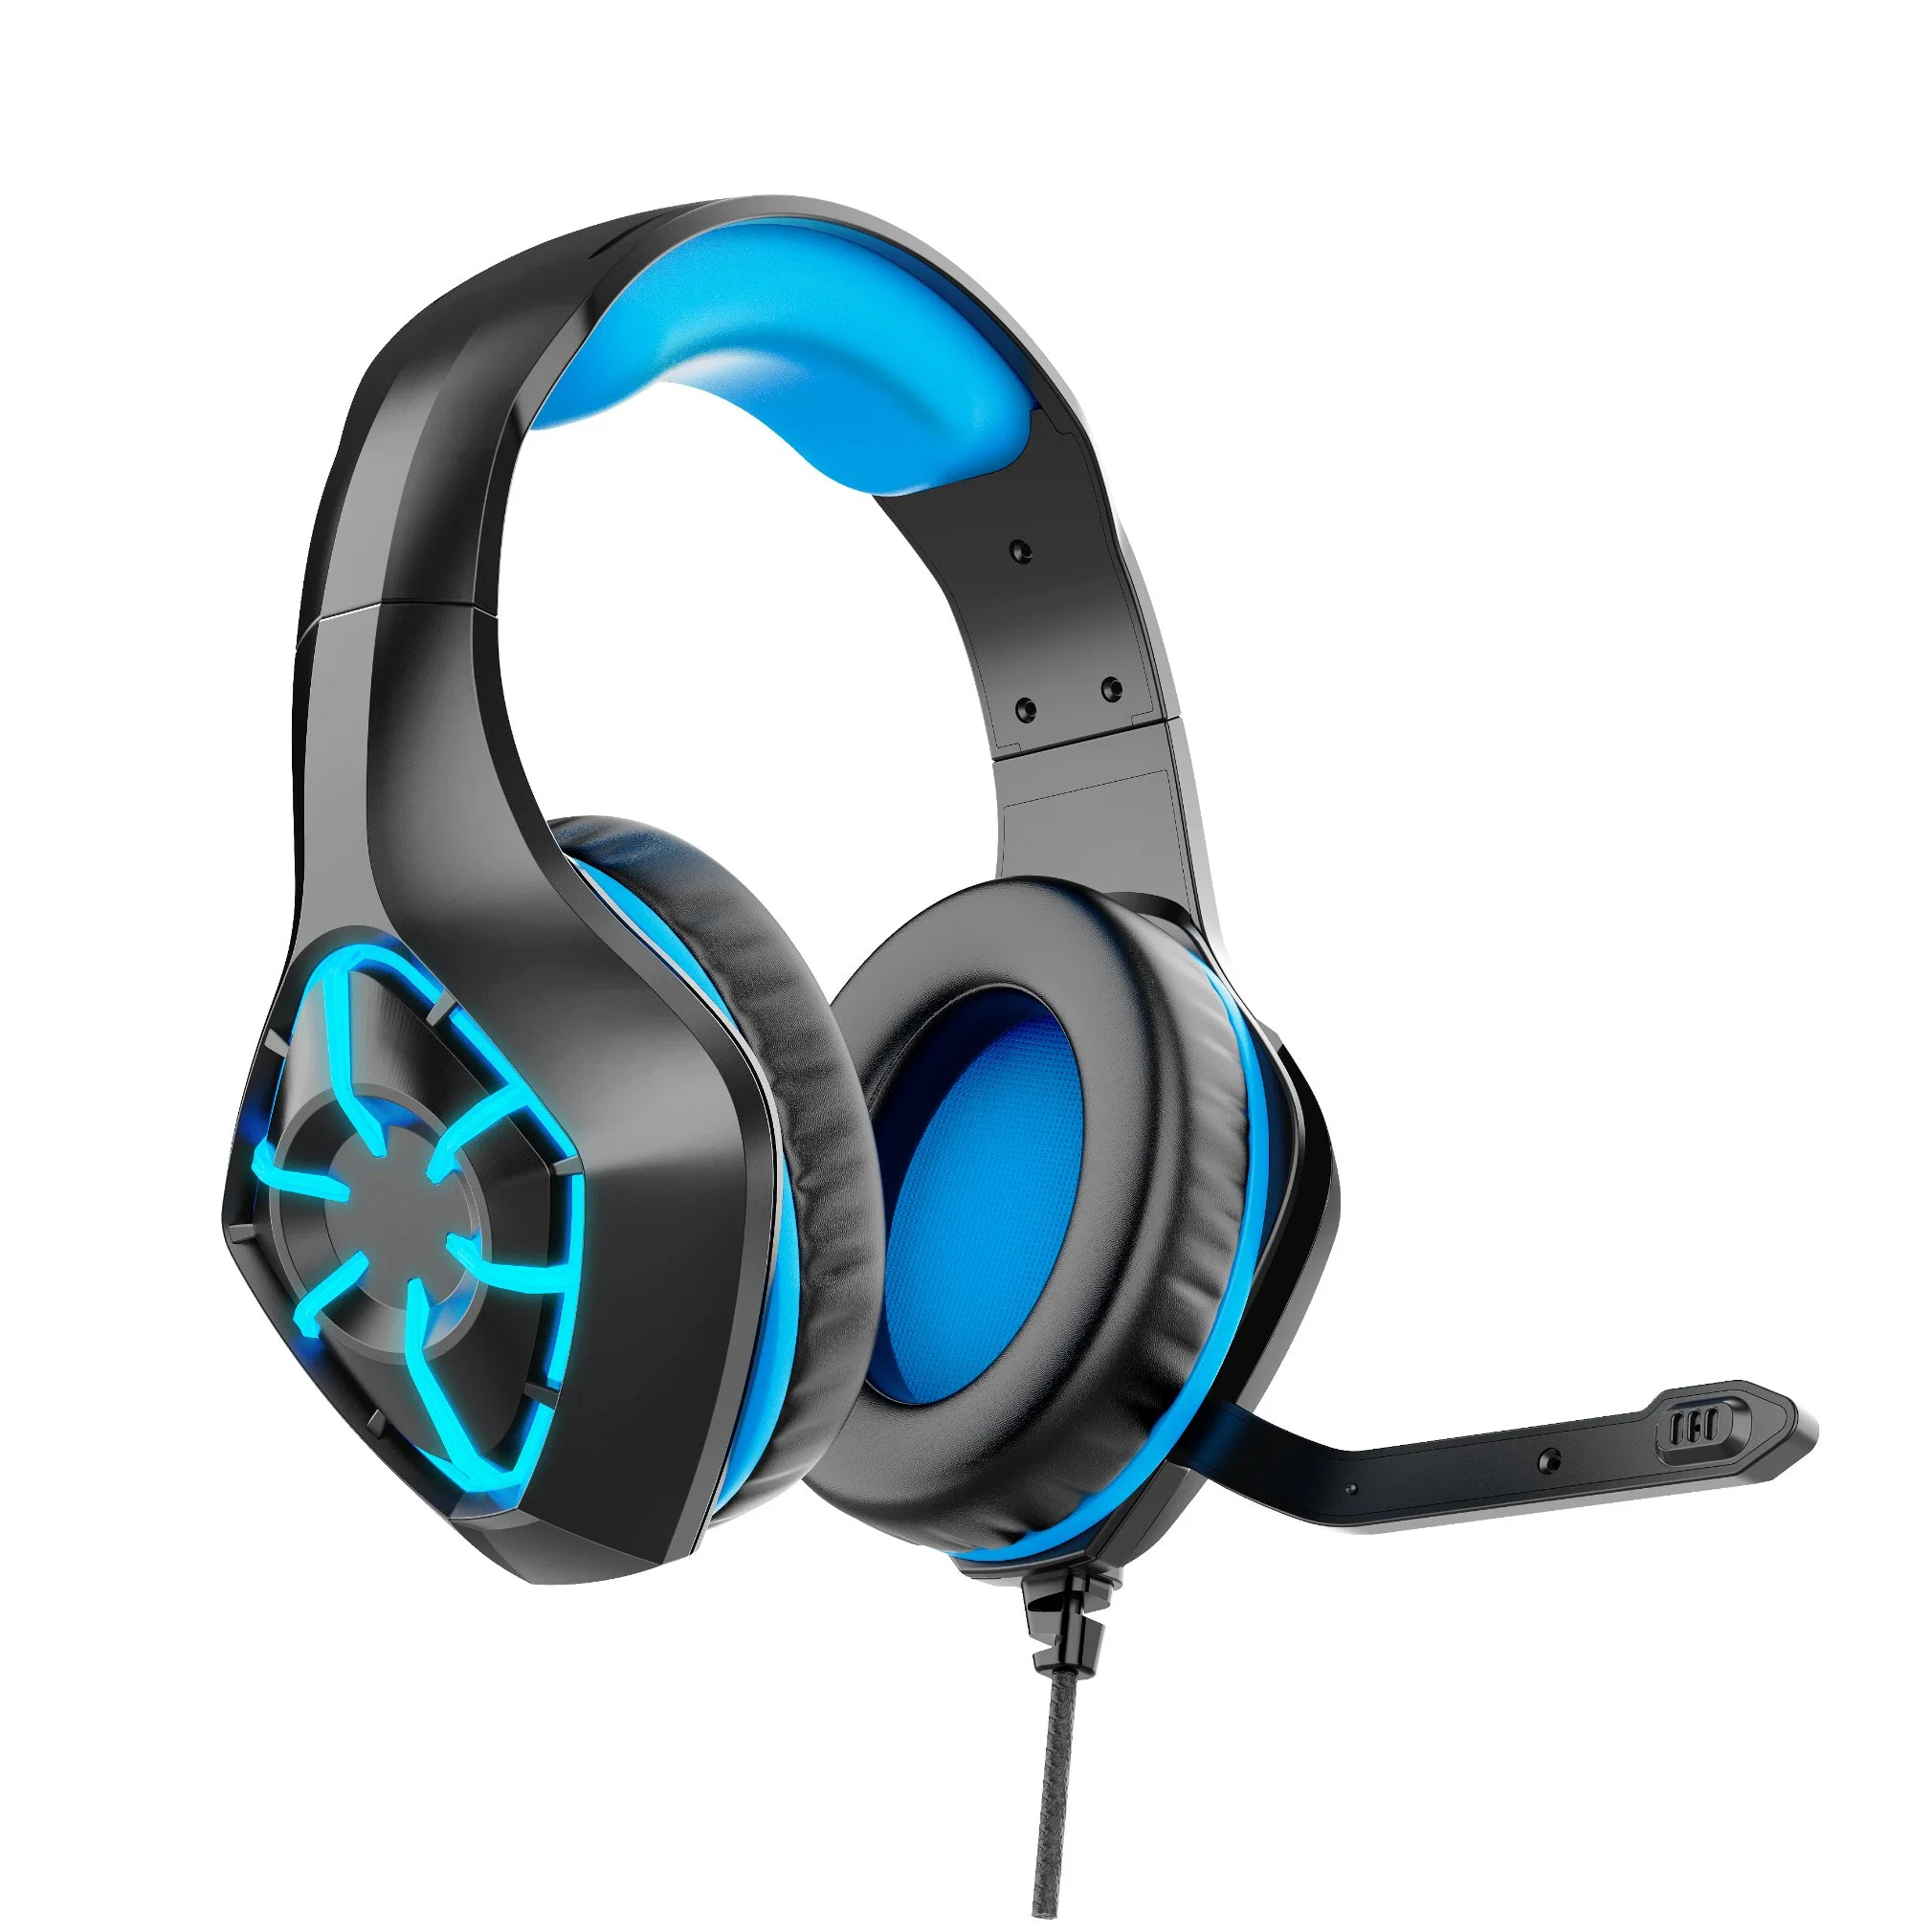 RGB Lighting Over Headband Wired Gaming Headset with Mic for PC Computer PS4 Play Ear Headphones